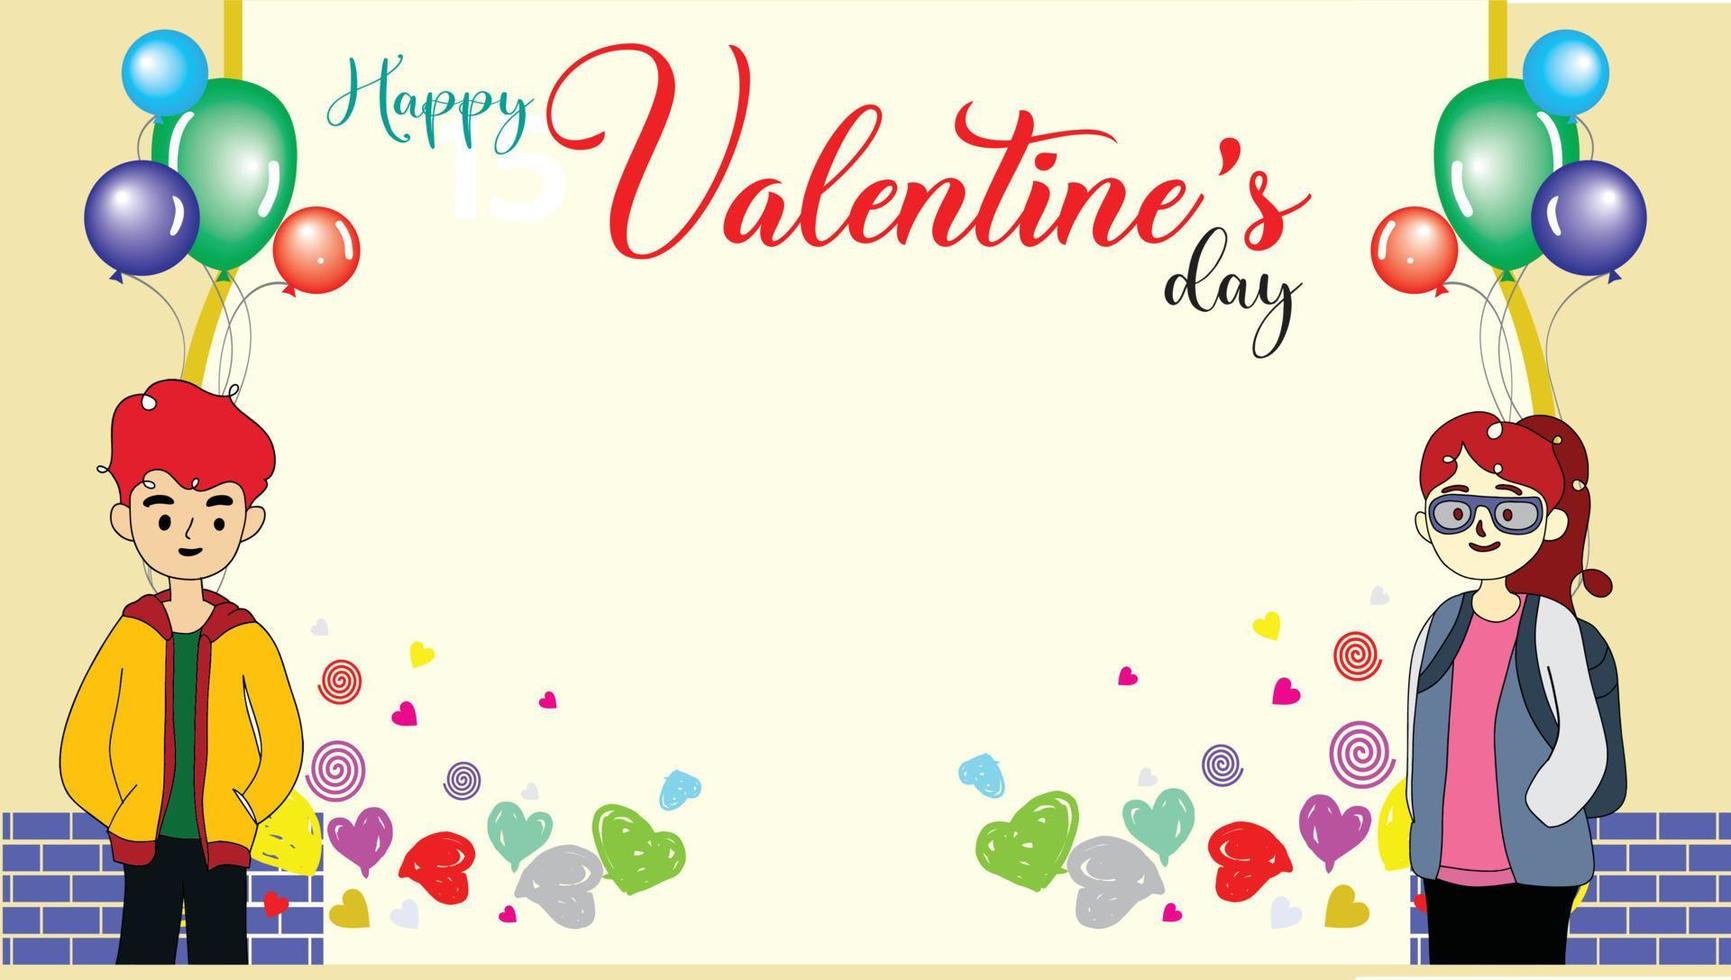 Valentine's day greeting cards with blank space areas and cartoon characters  Colorful backgrounds vector